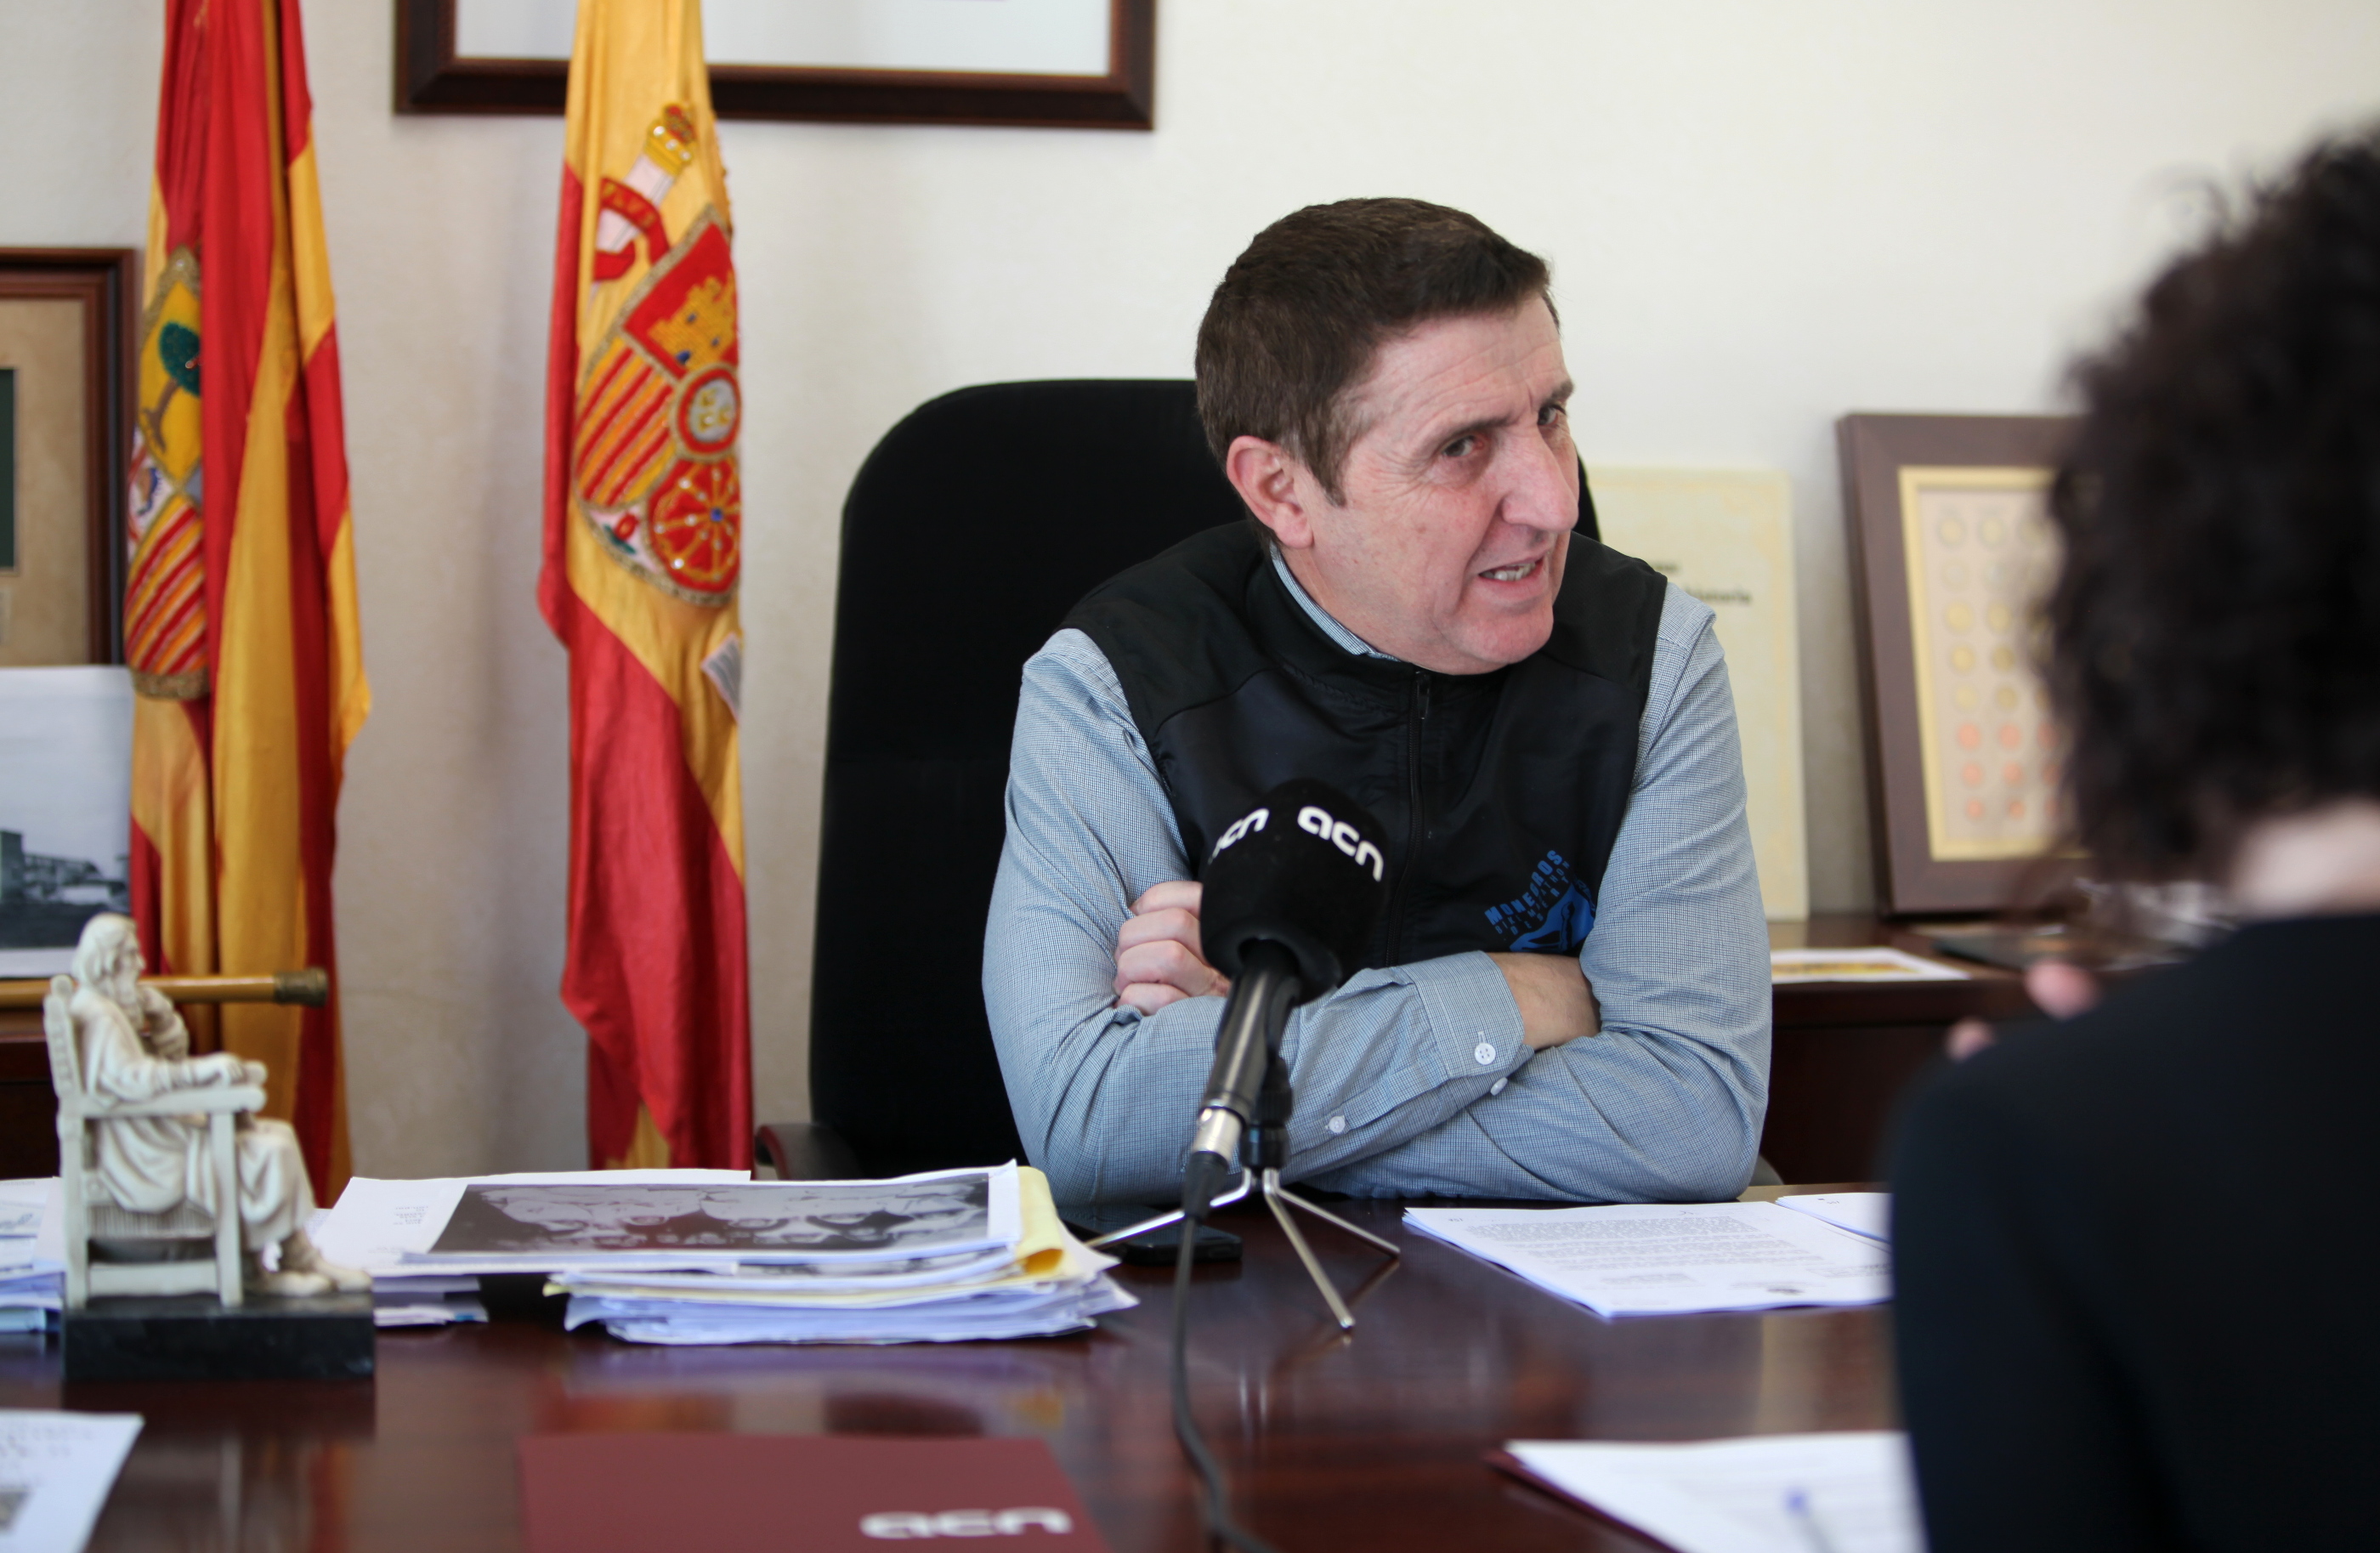 The mayor of Vilanova de Sixena, Ildefonso Salillas, during an interview with the Catalan News Agency on February 9 2018 (by Albert Segura)